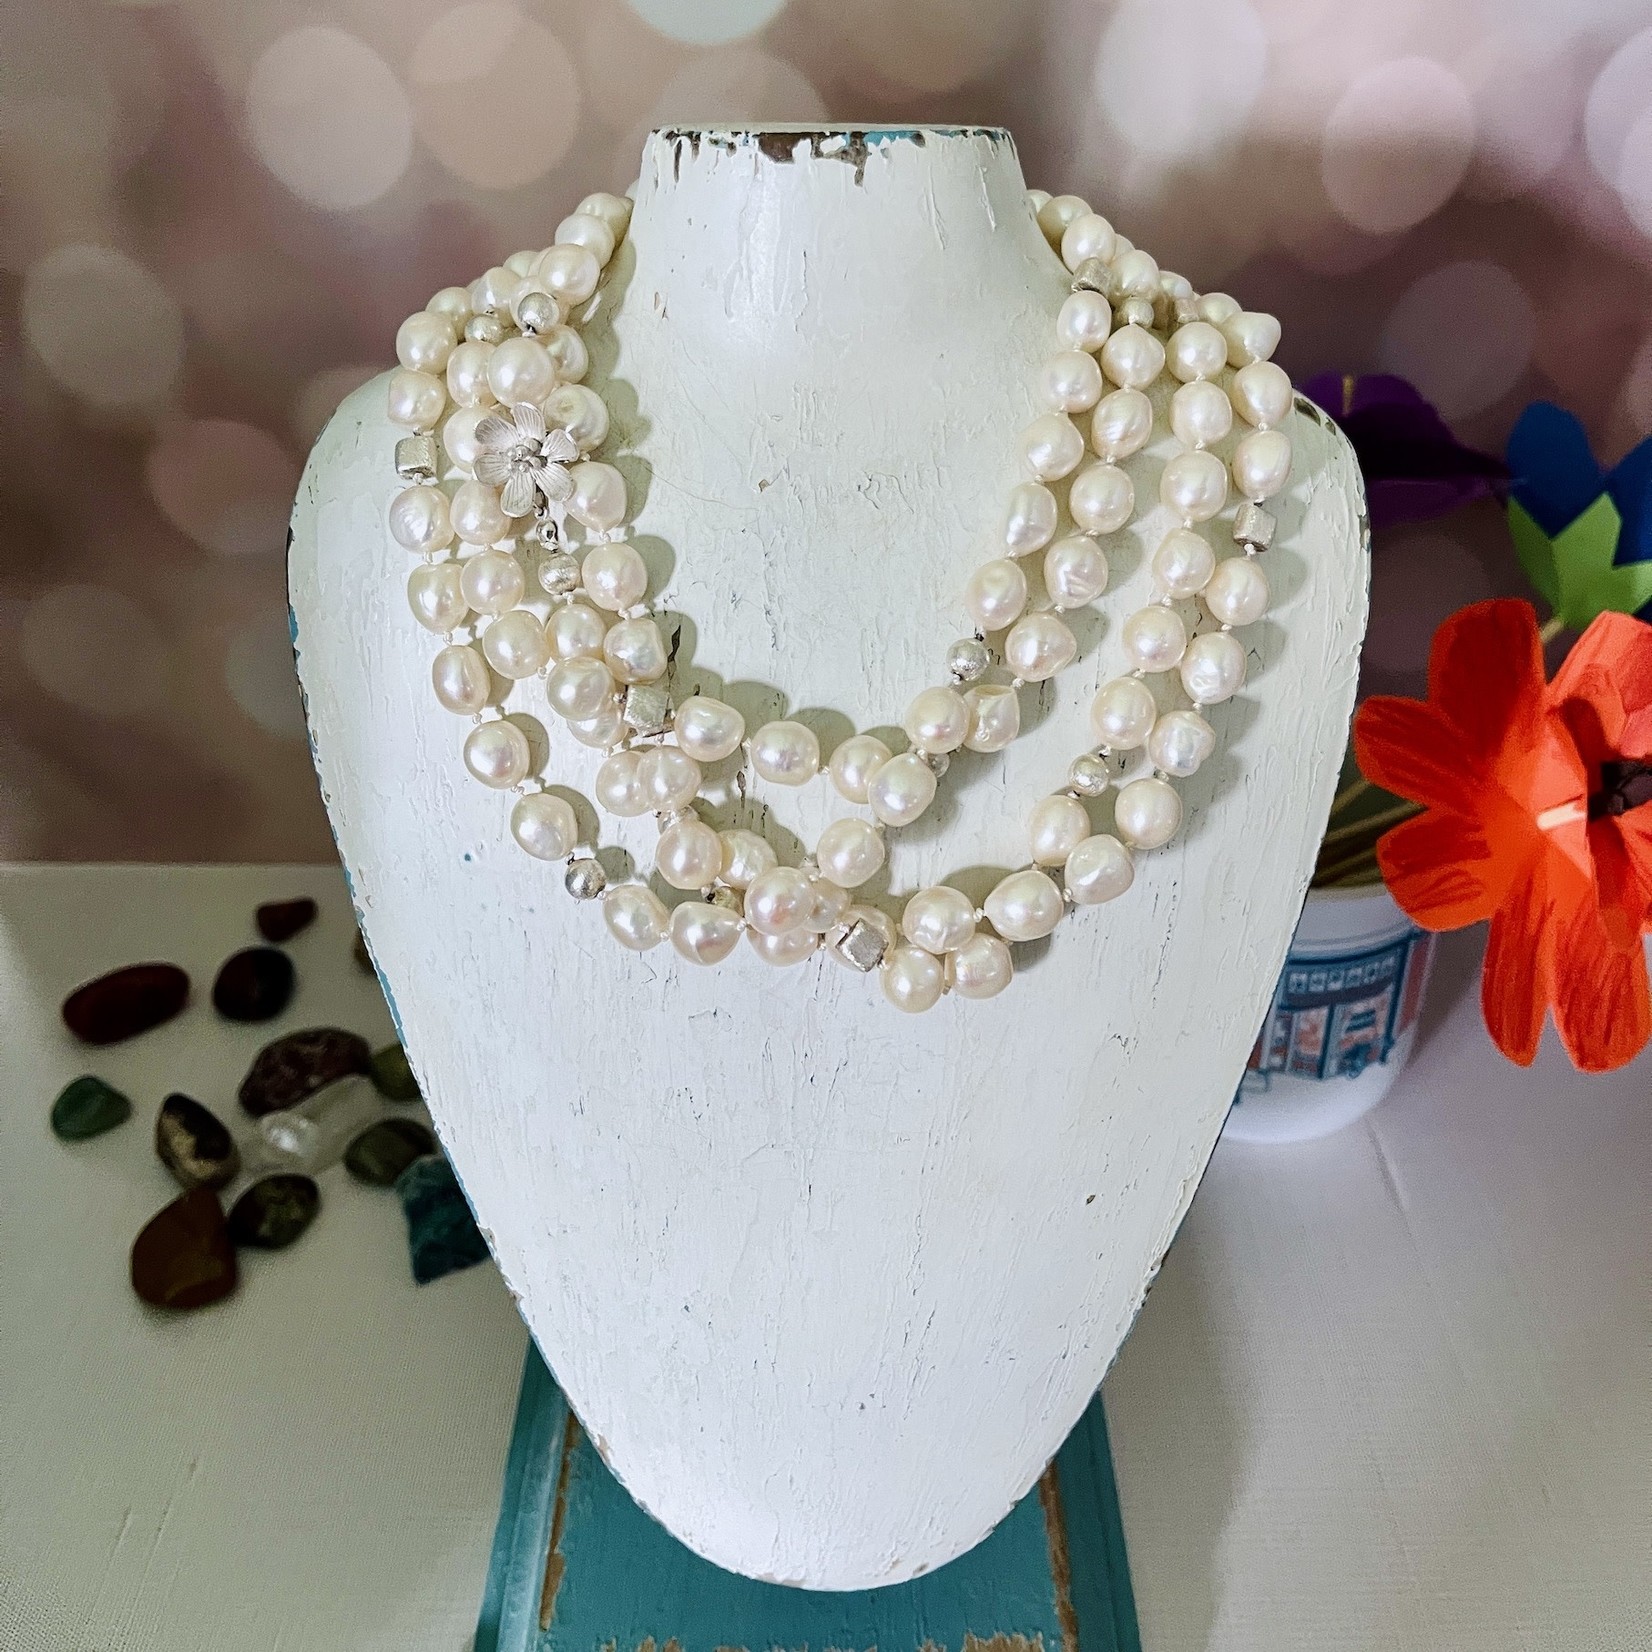 Handmade Necklace with White Pearls